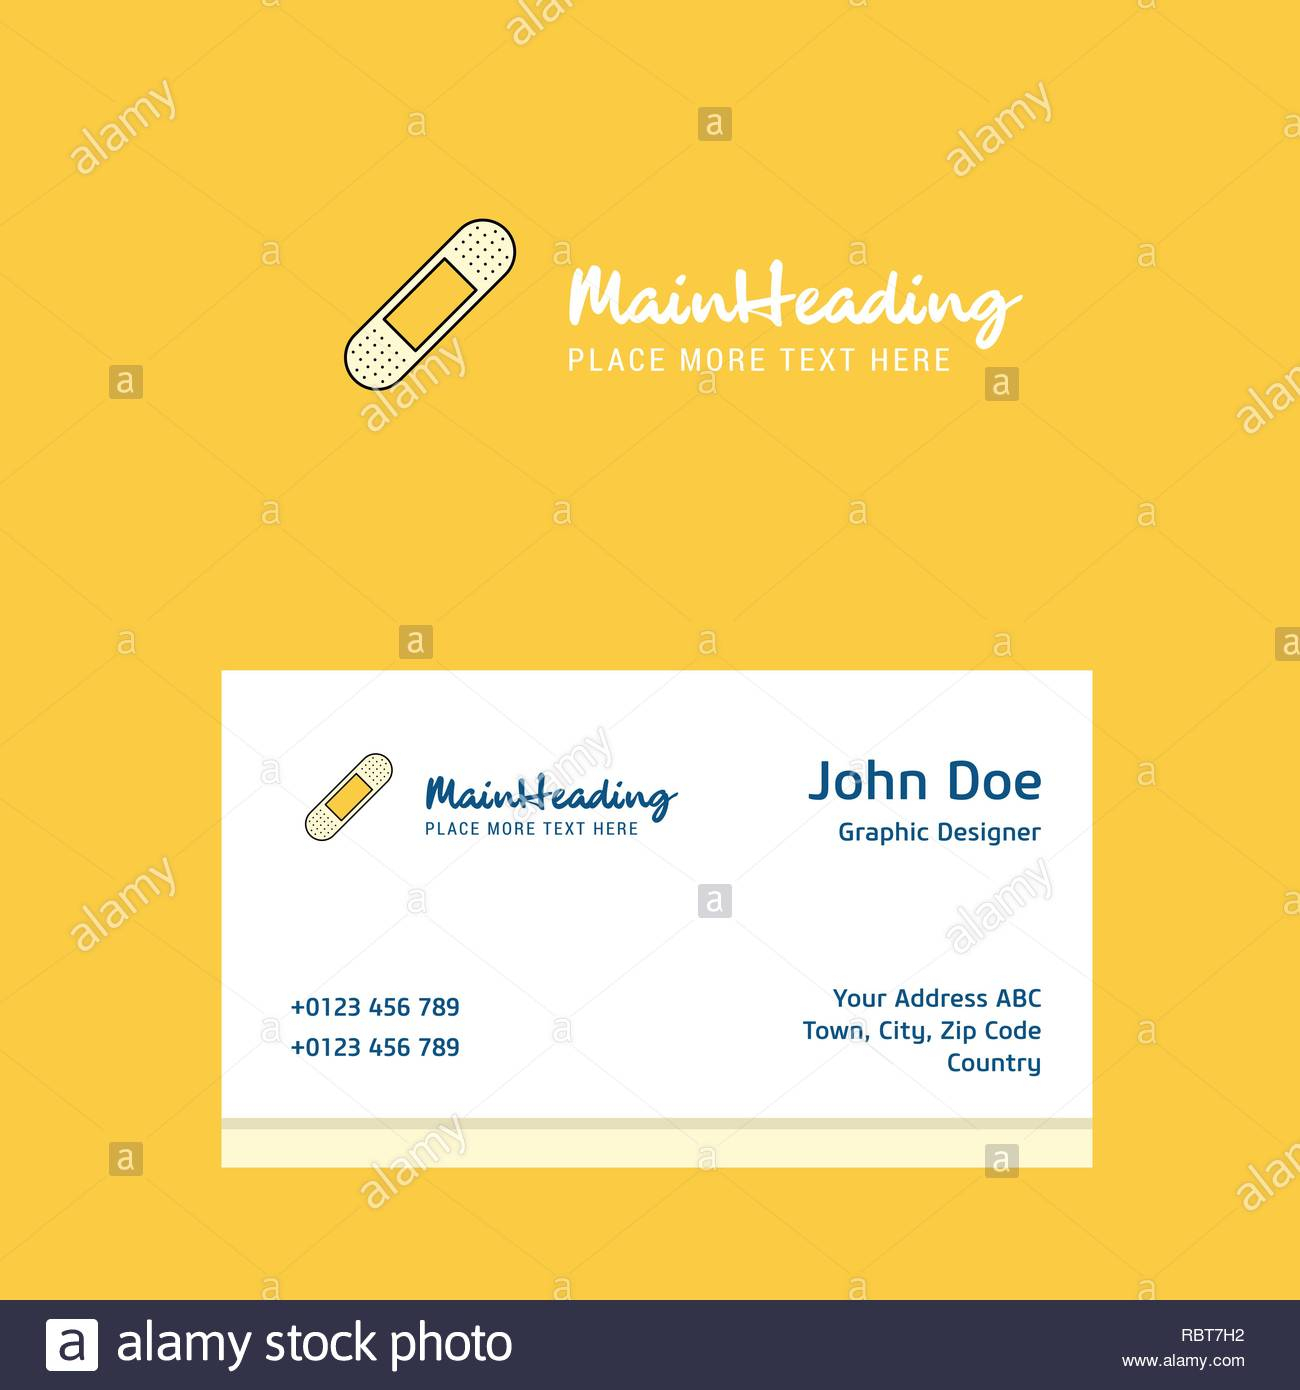 Plaster Logo Design With Business Card Template. Elegant Pertaining To Plastering Business Cards Templates